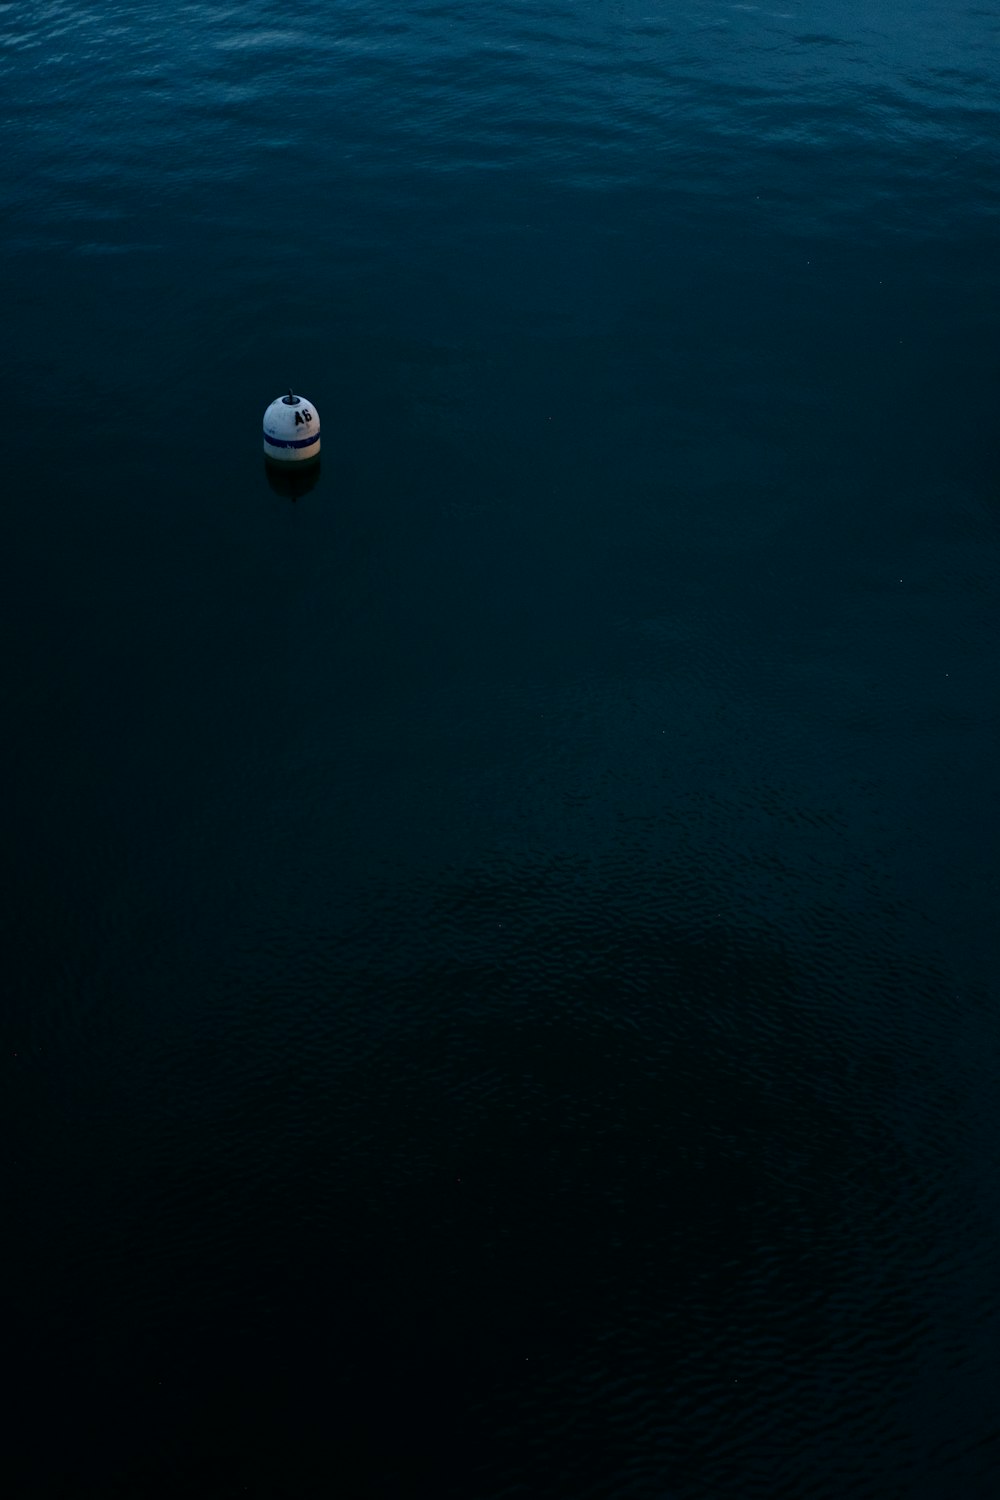 white toy floating on body of water